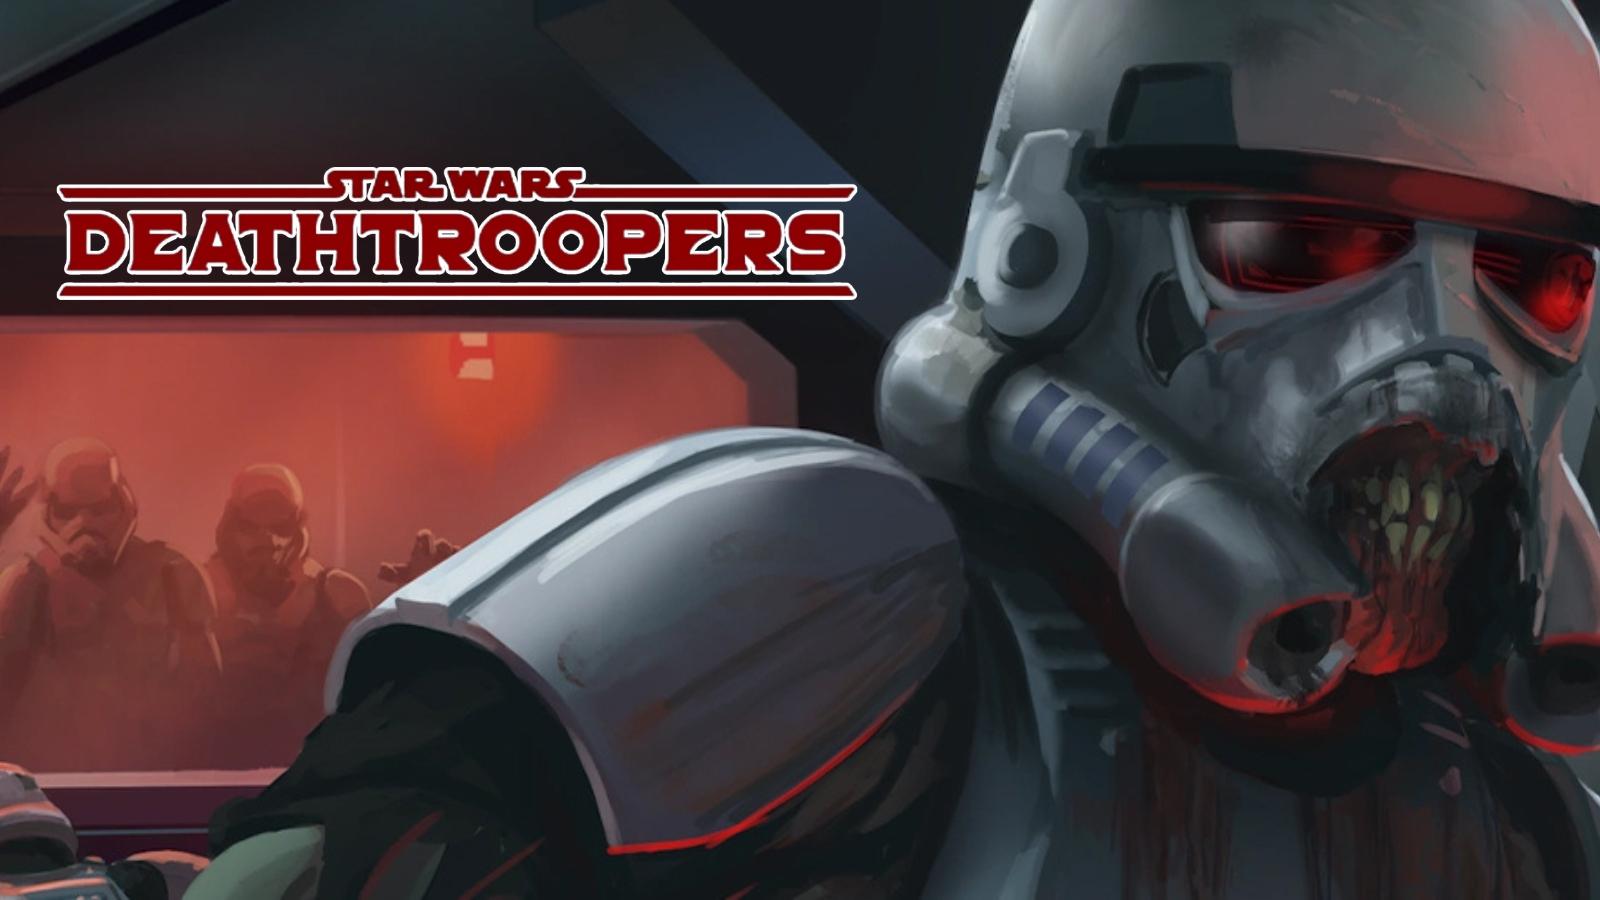 Star Wars deathtroopers cover